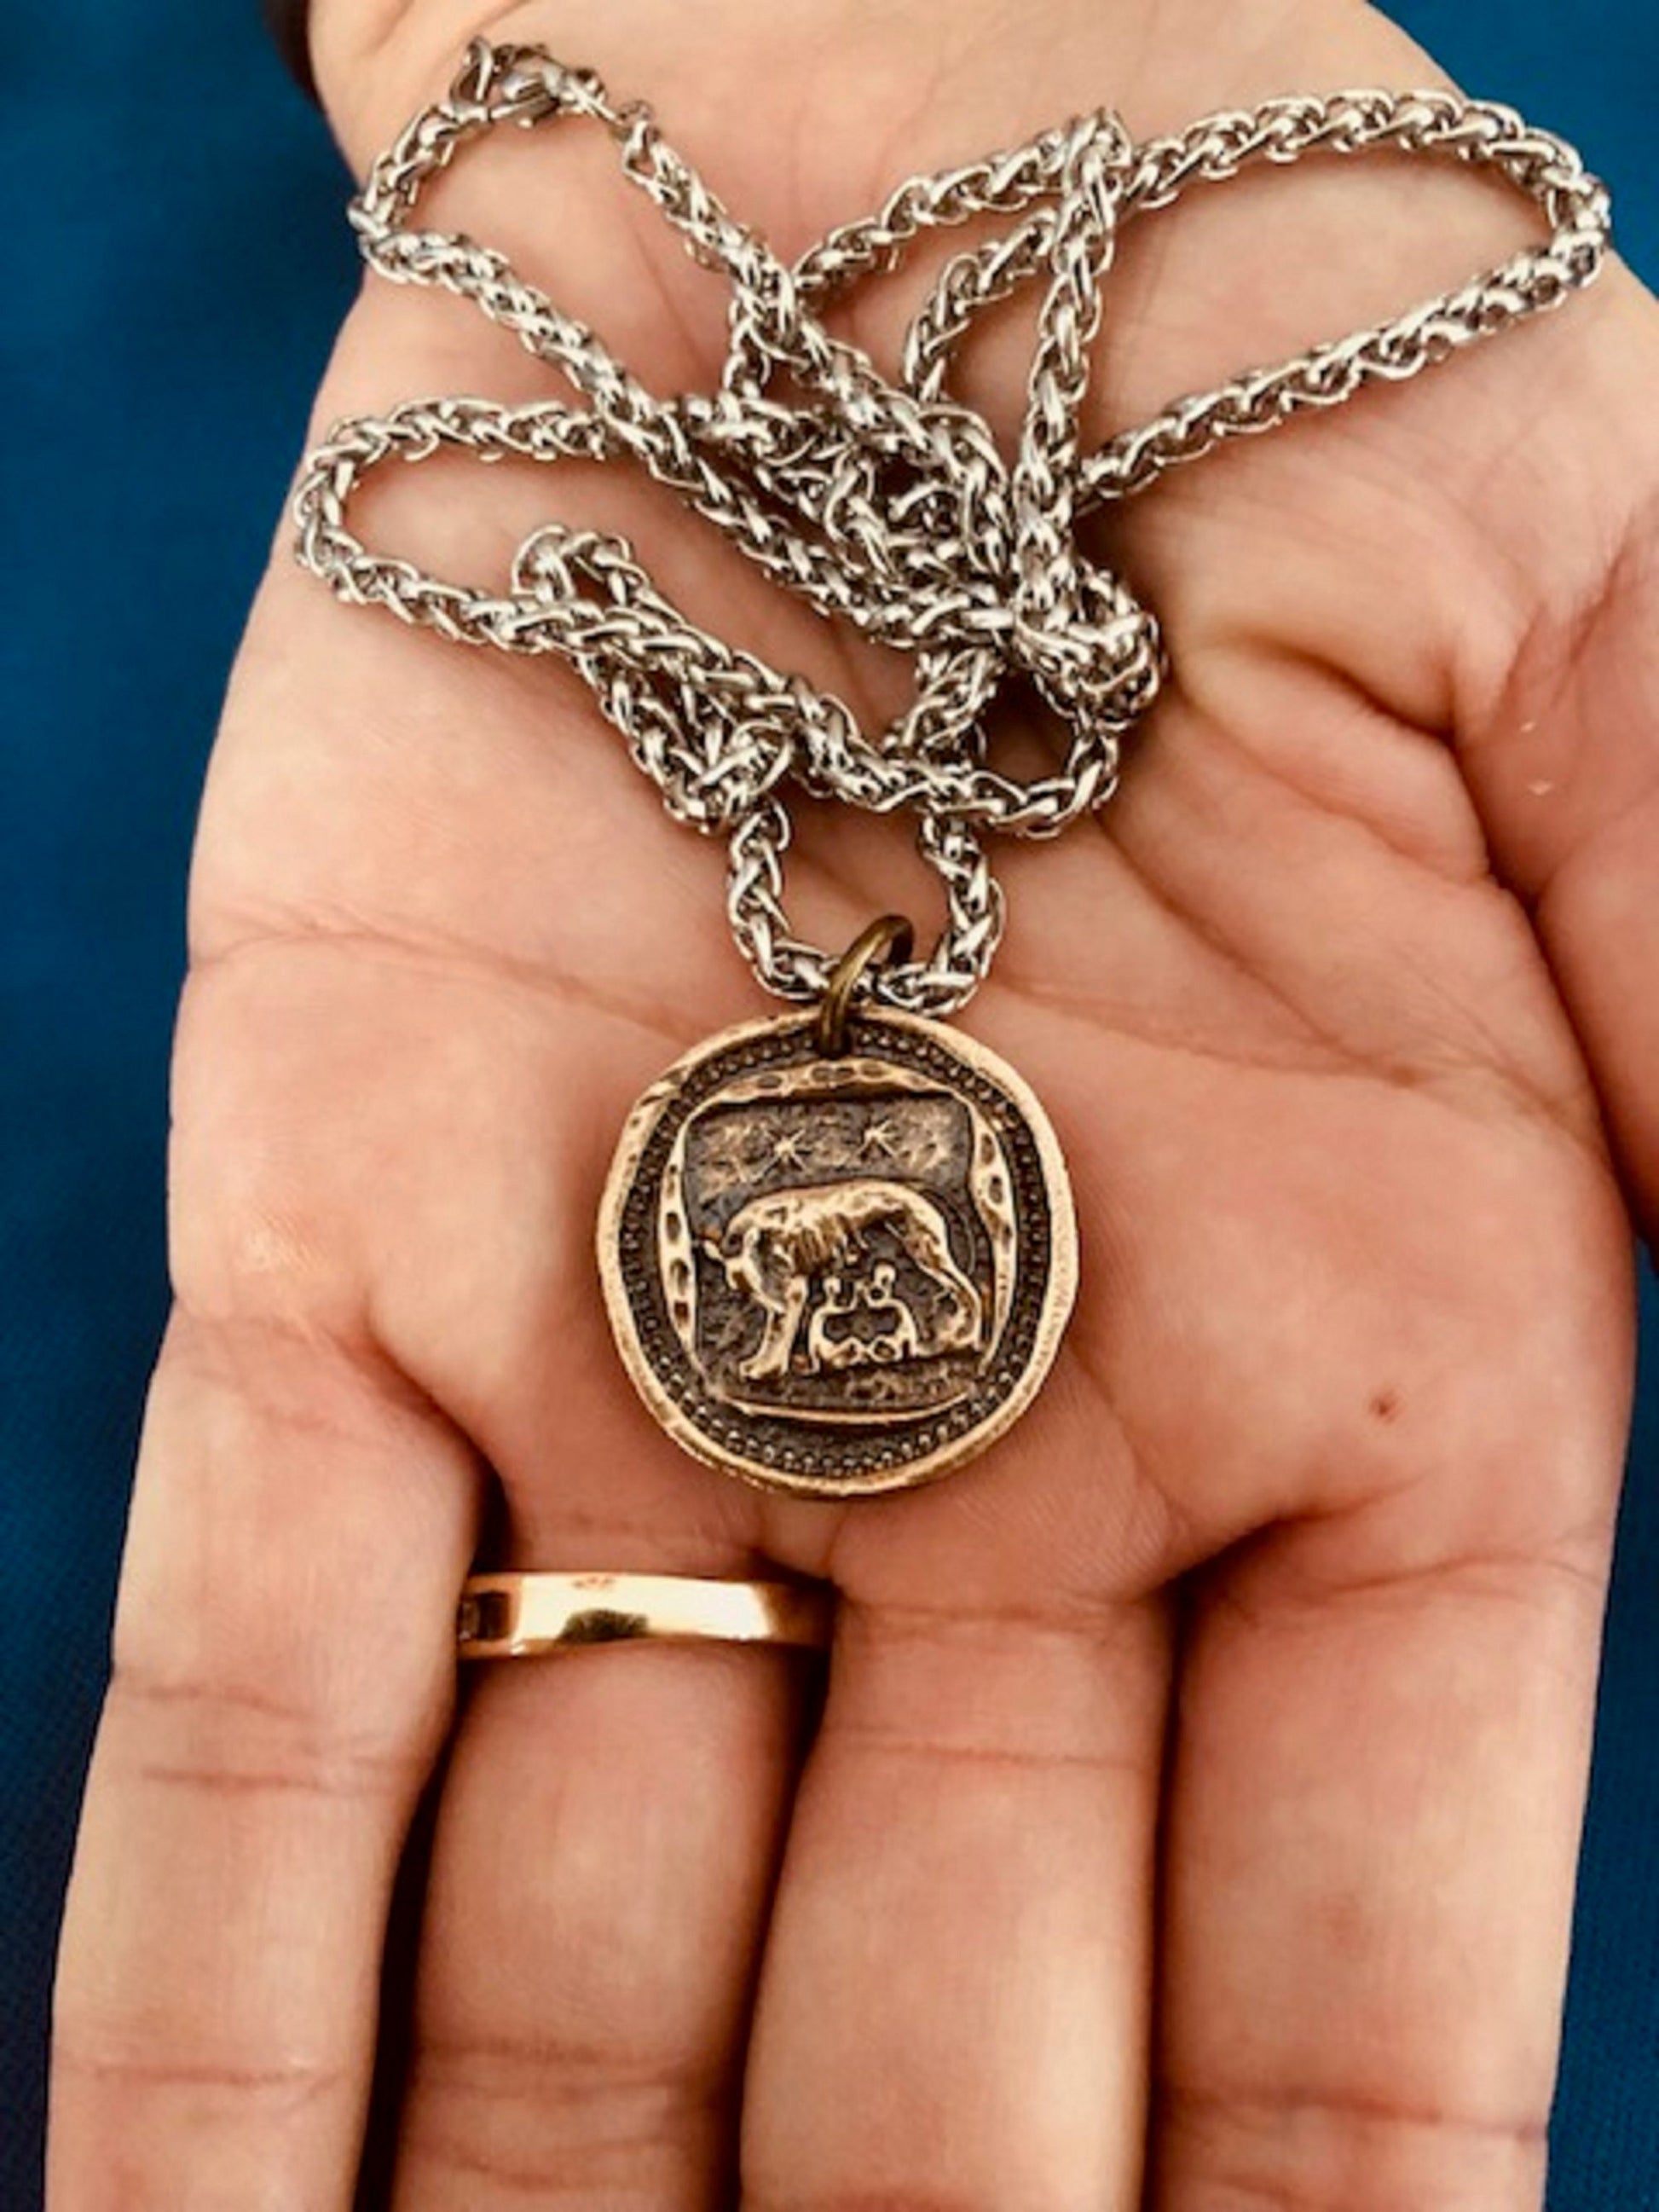 Wax Seal Antique Bronze Rome Pendant - She Wolf Capitoline Suckling Wolves - Jewelry from an Antique Wax Seal - Charm Fascinations 121